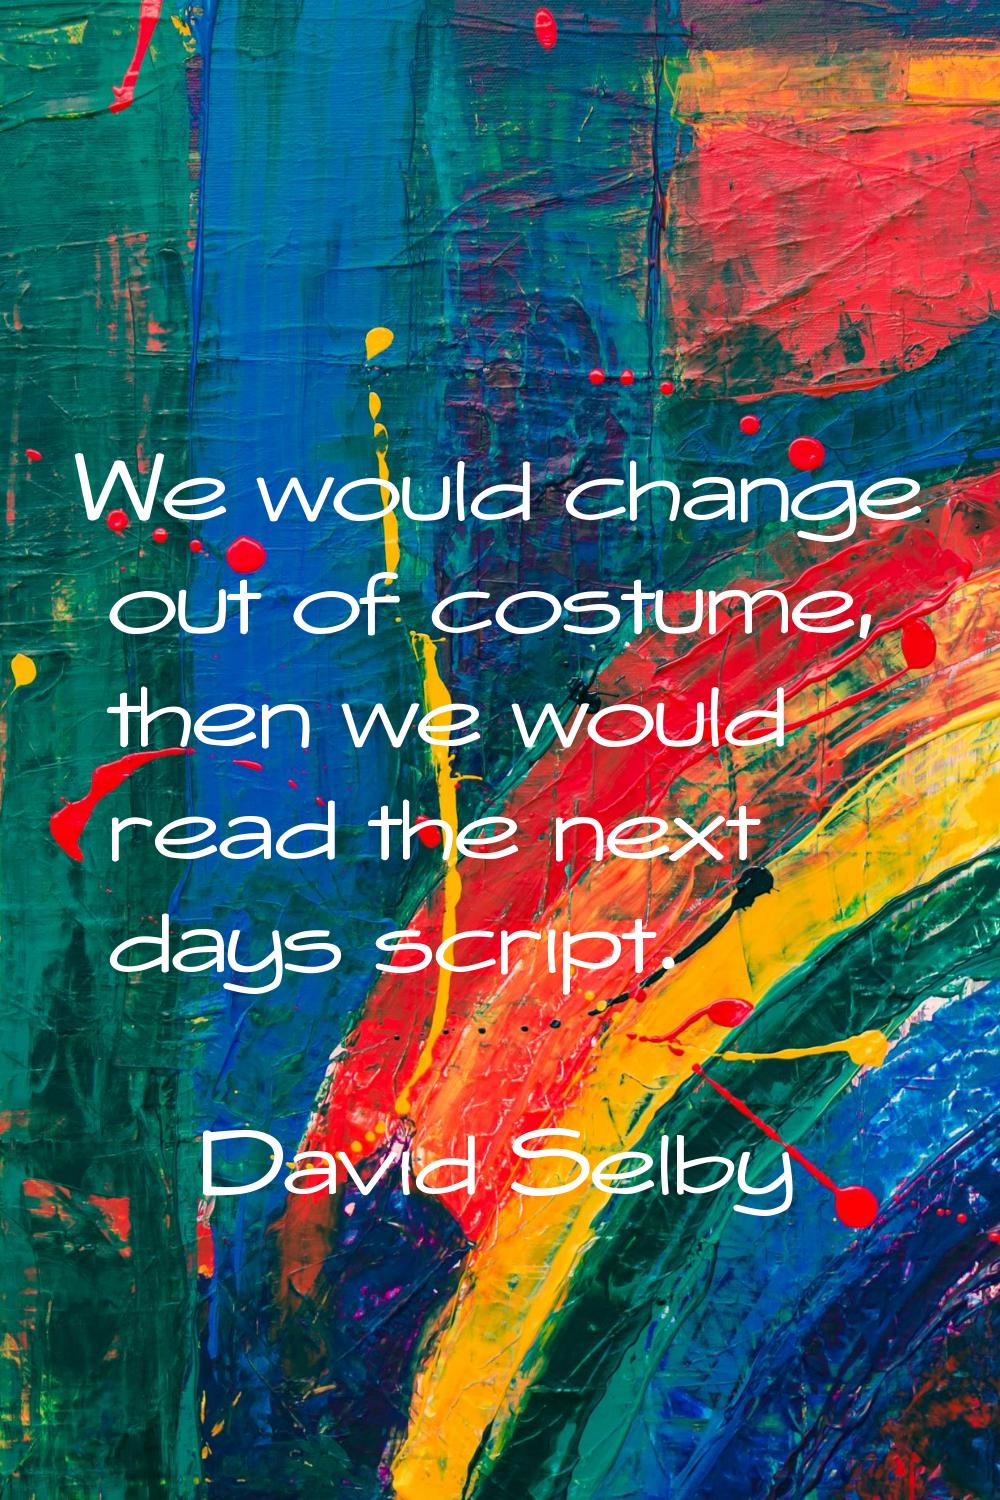 We would change out of costume, then we would read the next days script.